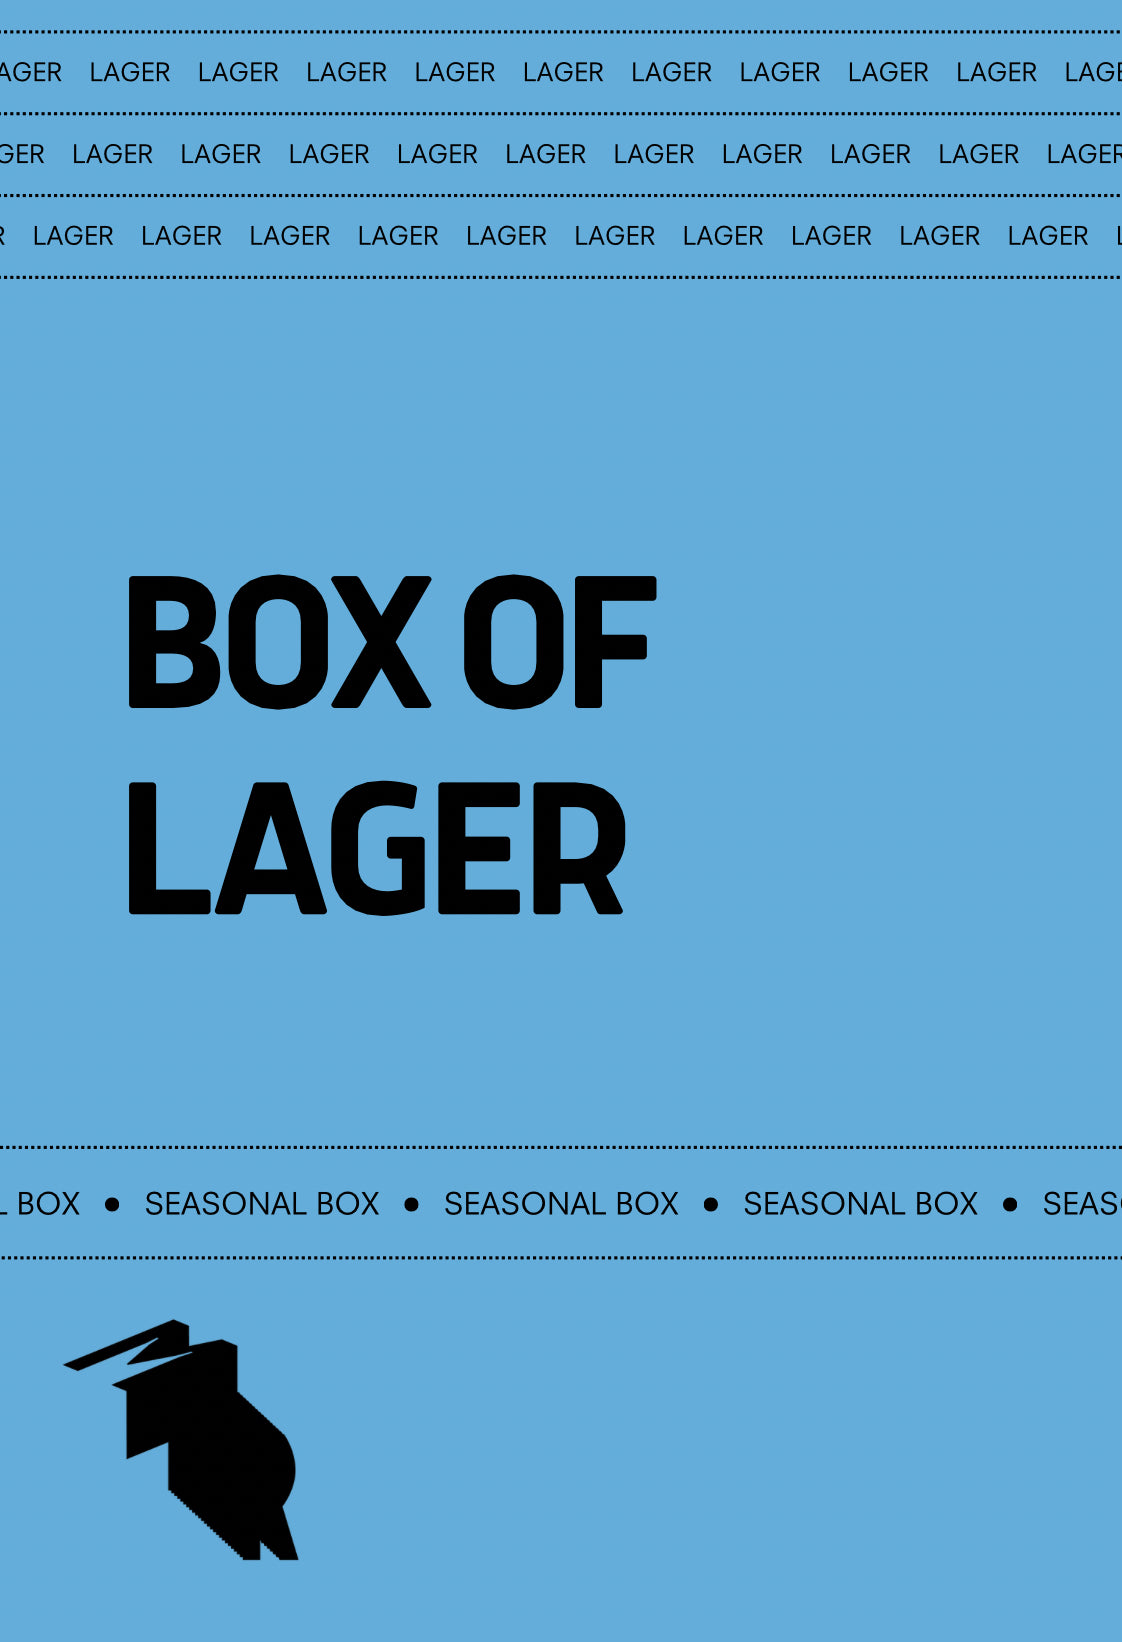 BOX OF LAGER